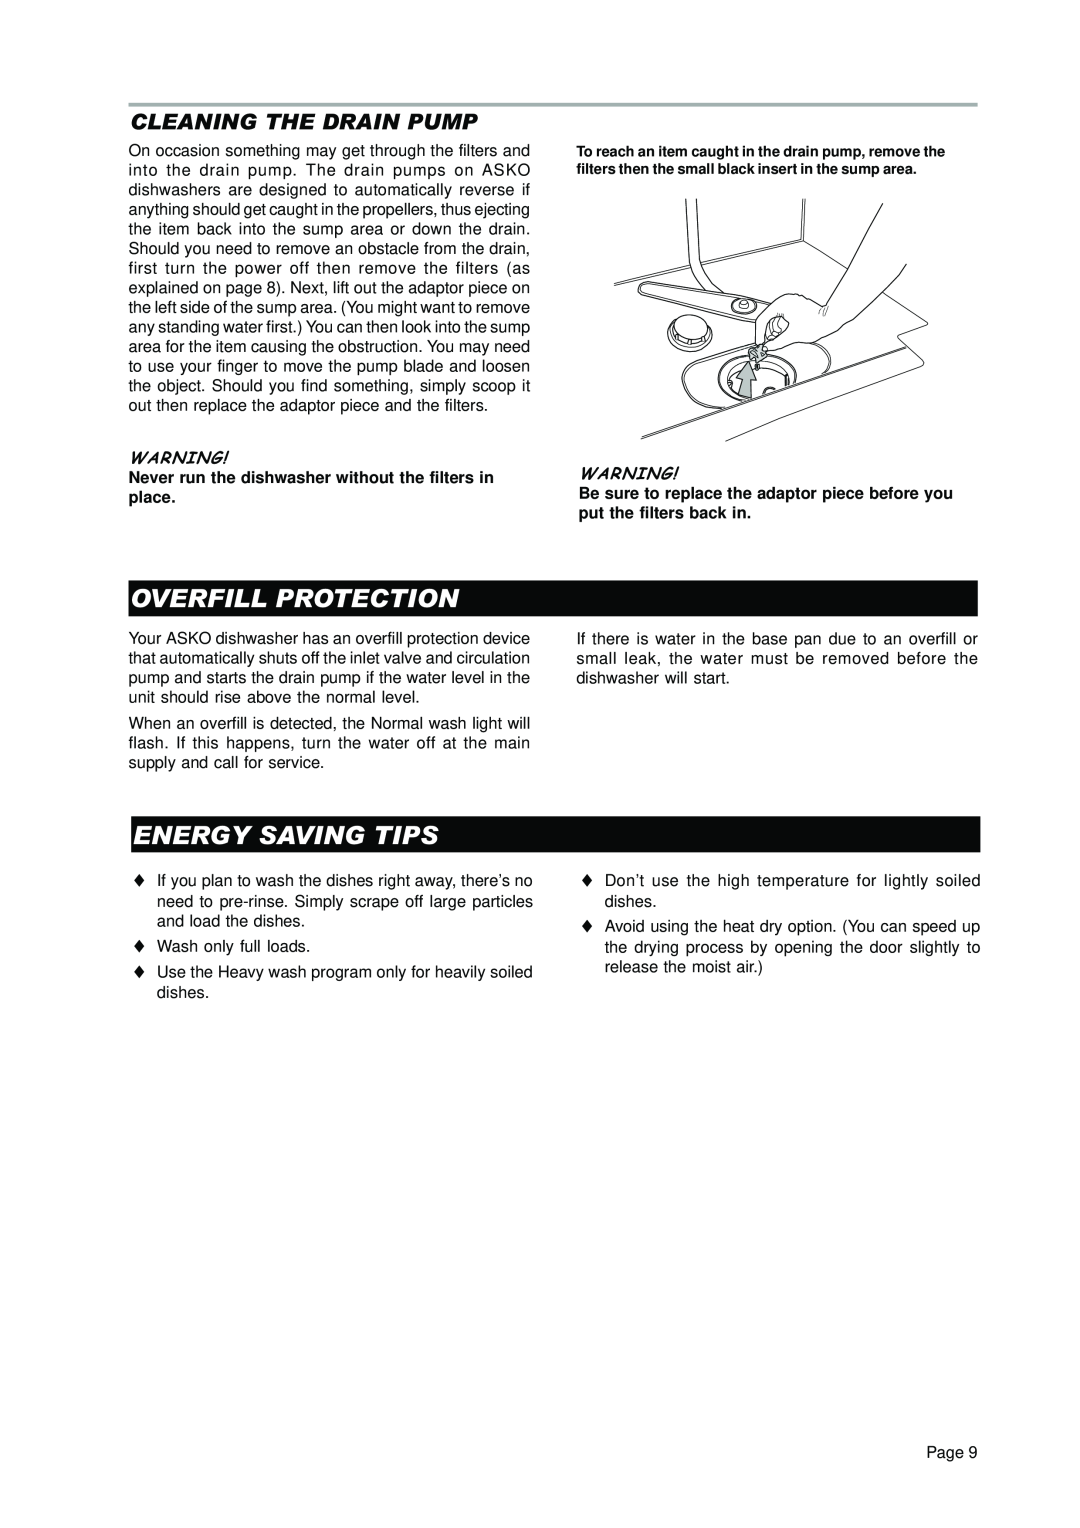 Asko D3250 operating instructions Overfill Protection, Energy Saving Tips, Cleaning The Drain Pump 